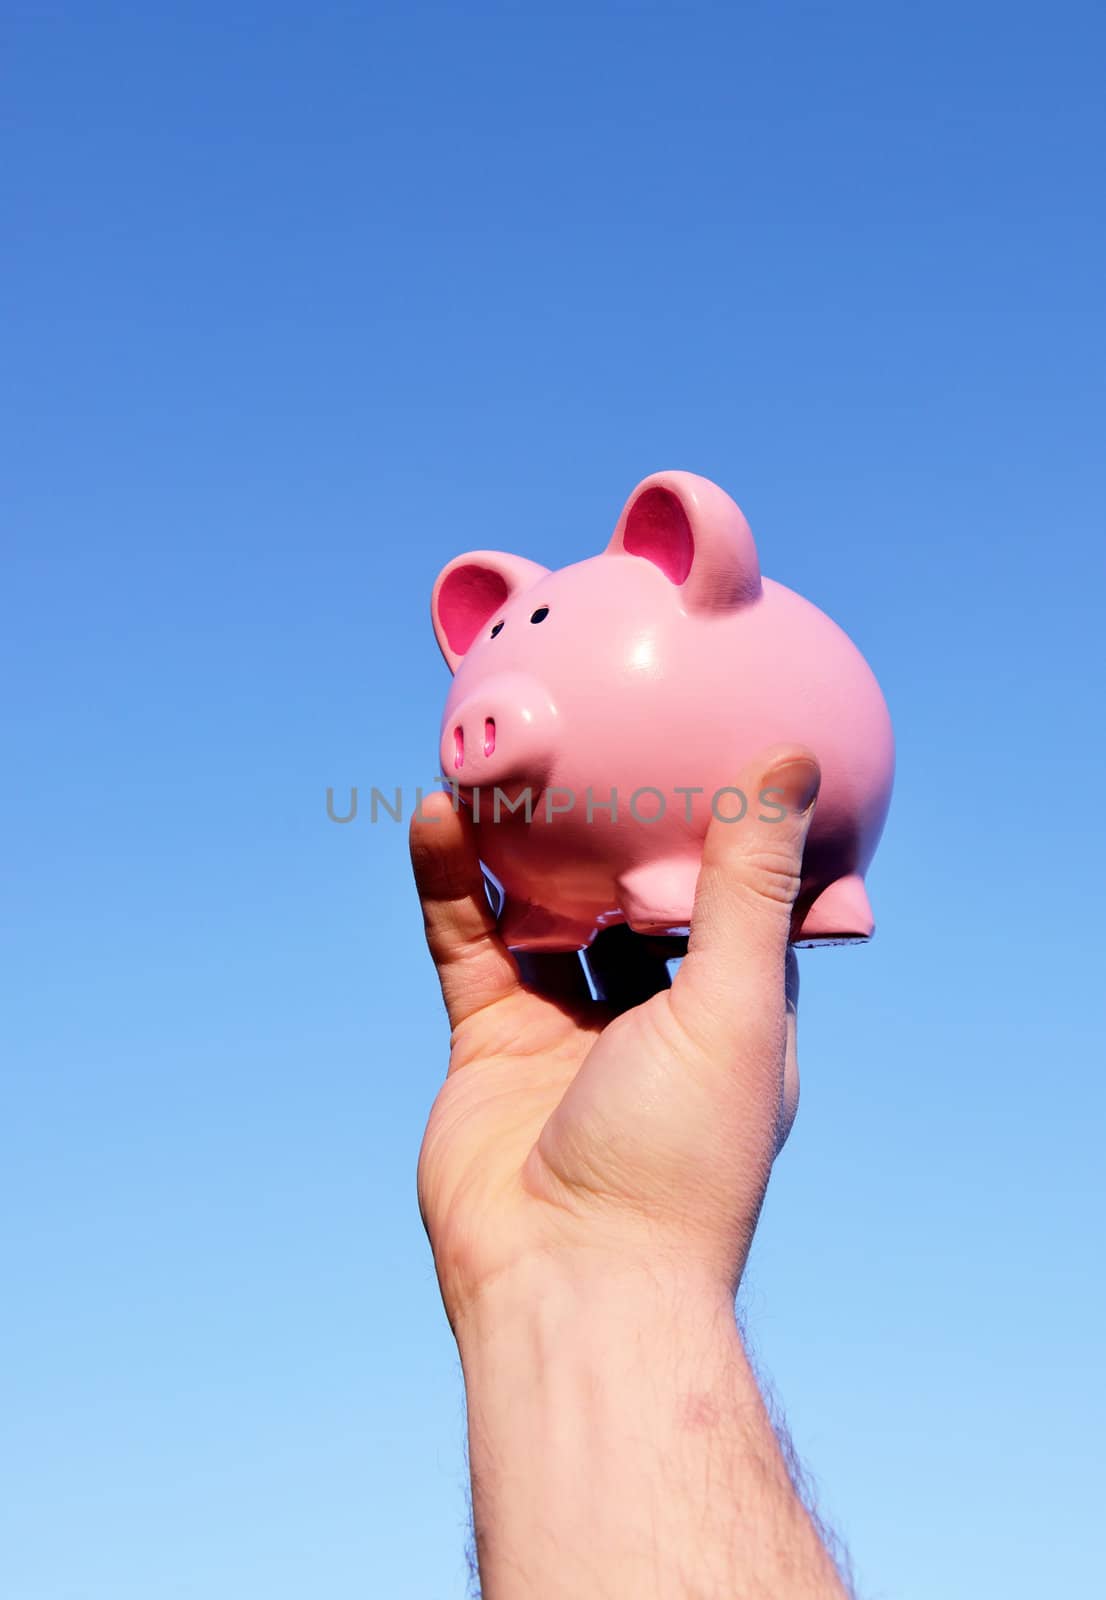 holding up a piggy bank against a pure blue sky background